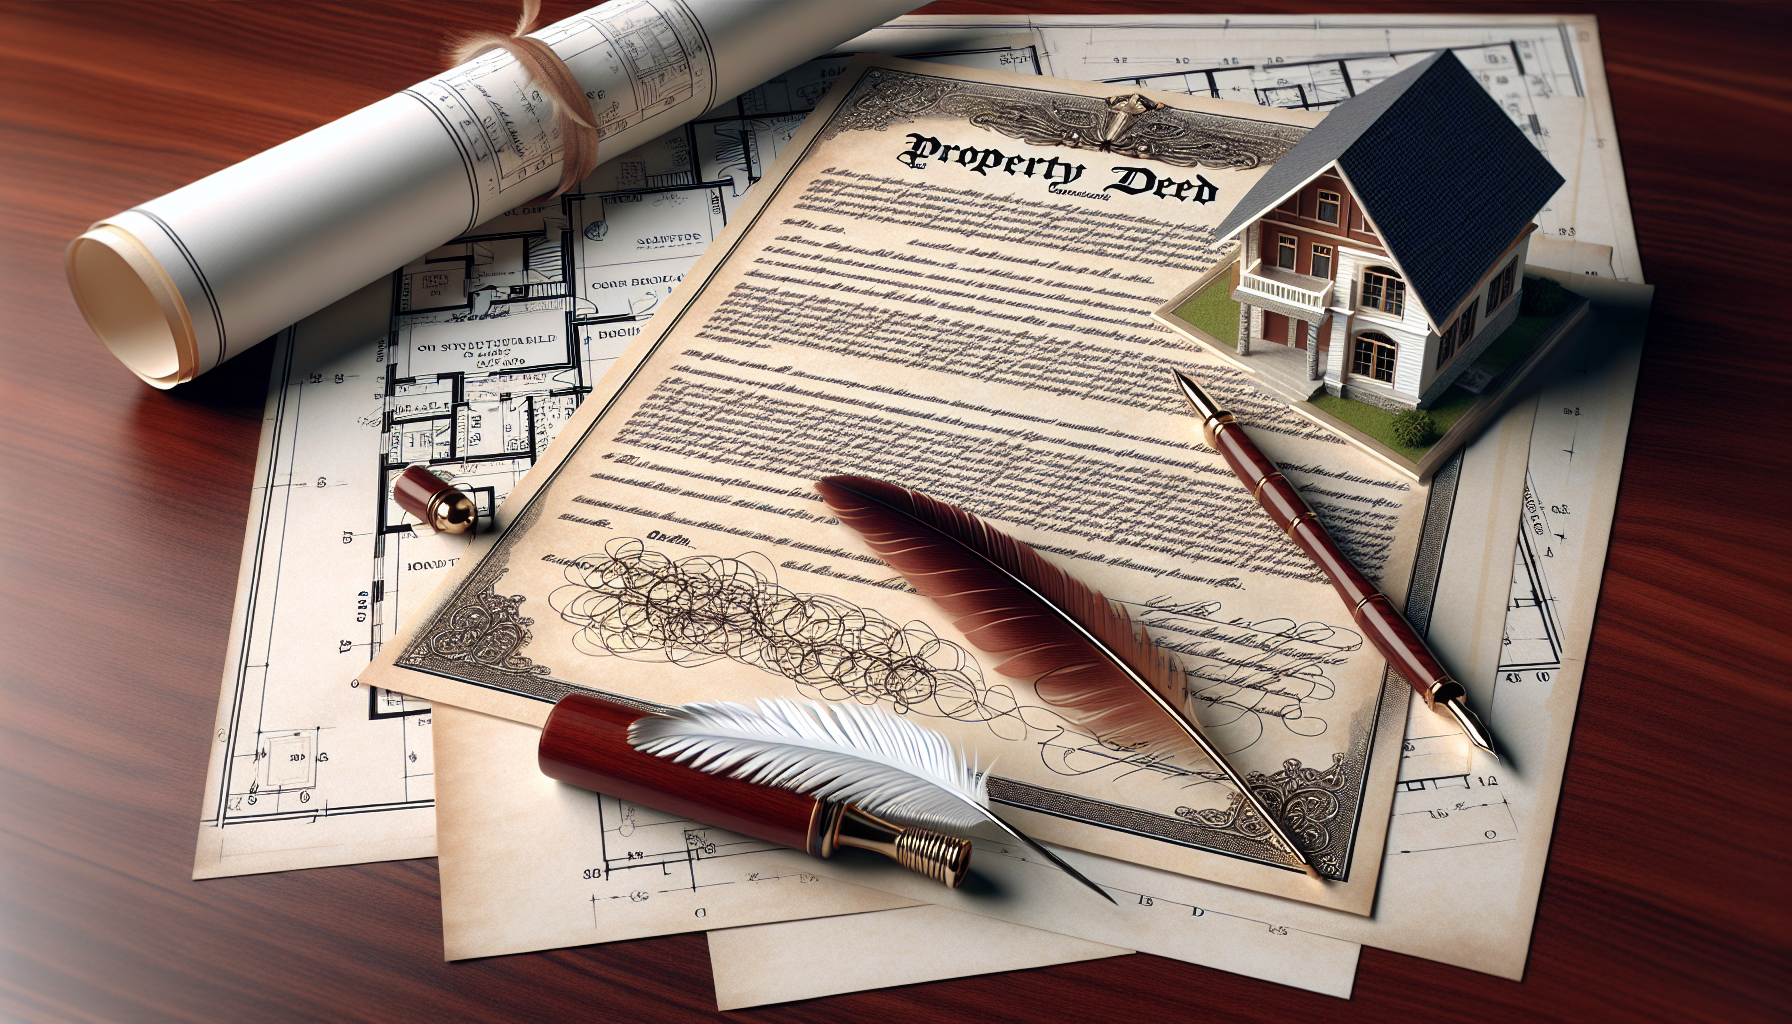 Illustration of a property deed with legal descriptions, showing the importance of property deeds in estate planning